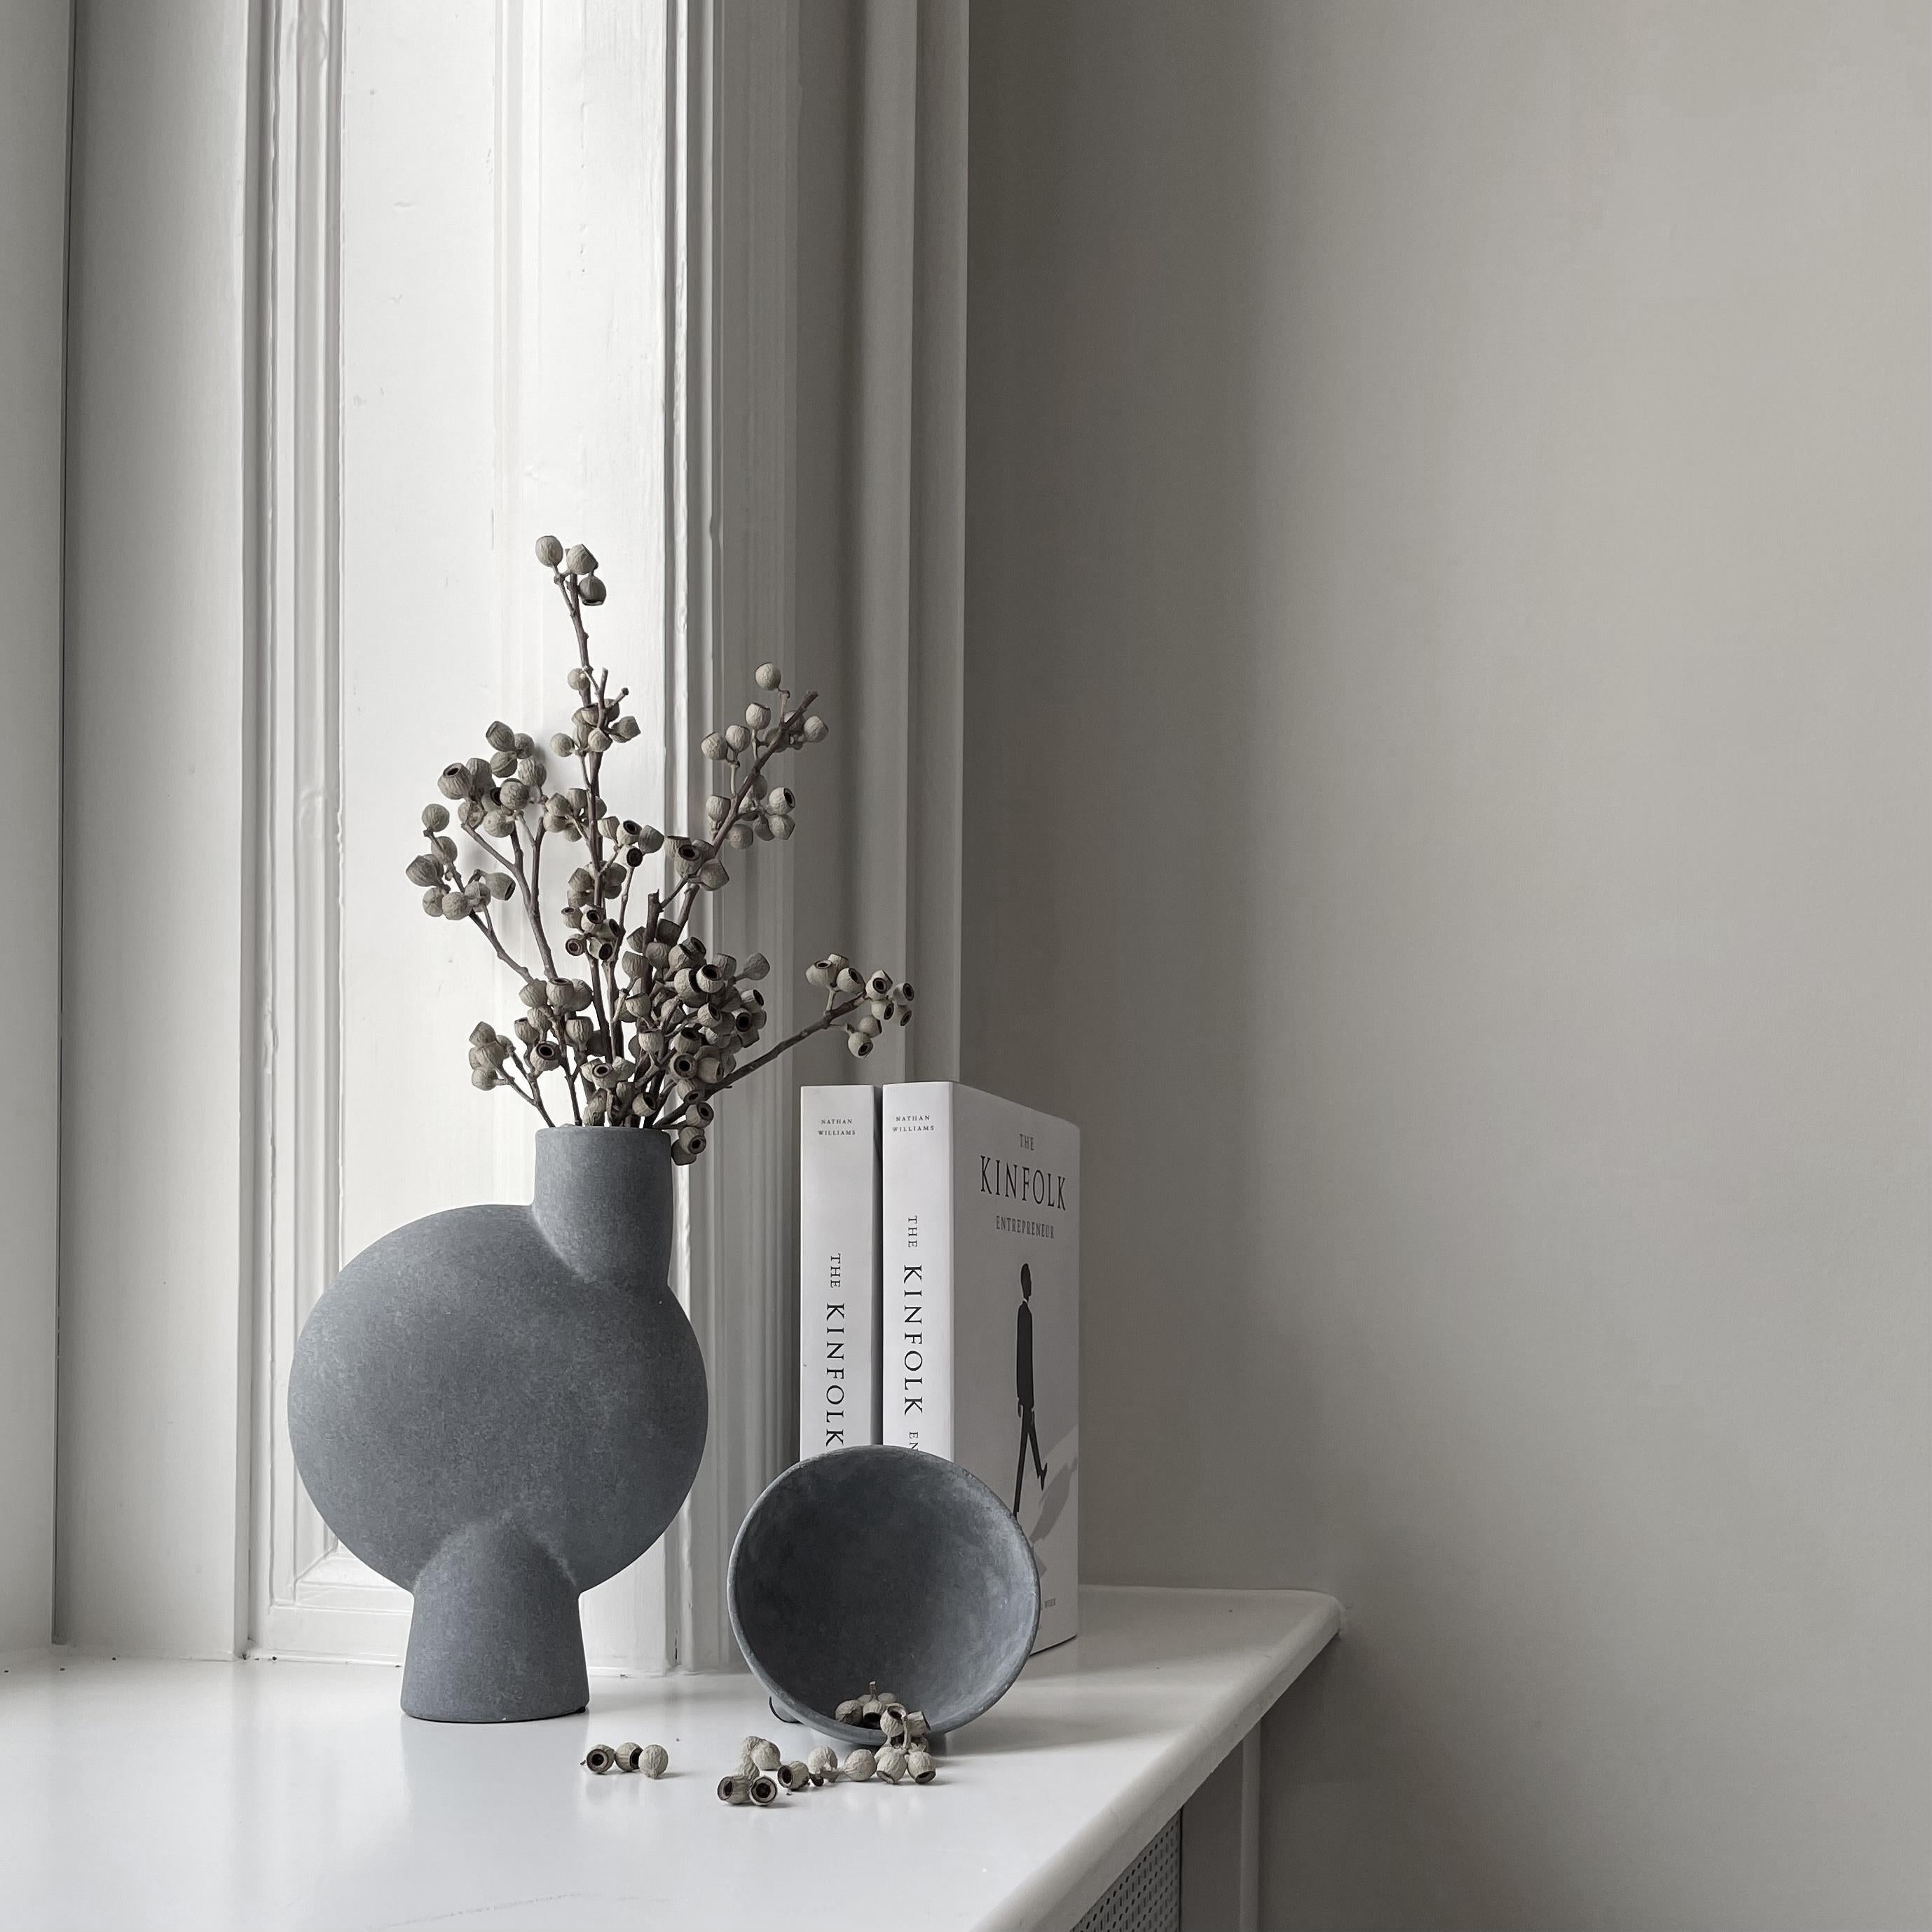 A set of 4 taupe medio sphere vase bubl by 101 Copenhagen
Designed by Kristian Sofus Hansen & Tommy Hyldahl
Dimensions: L 18 / W 8 / H26 cm
Materials: Ceramic

The Sphere collection celebrates unique silhouettes and textures that makes an